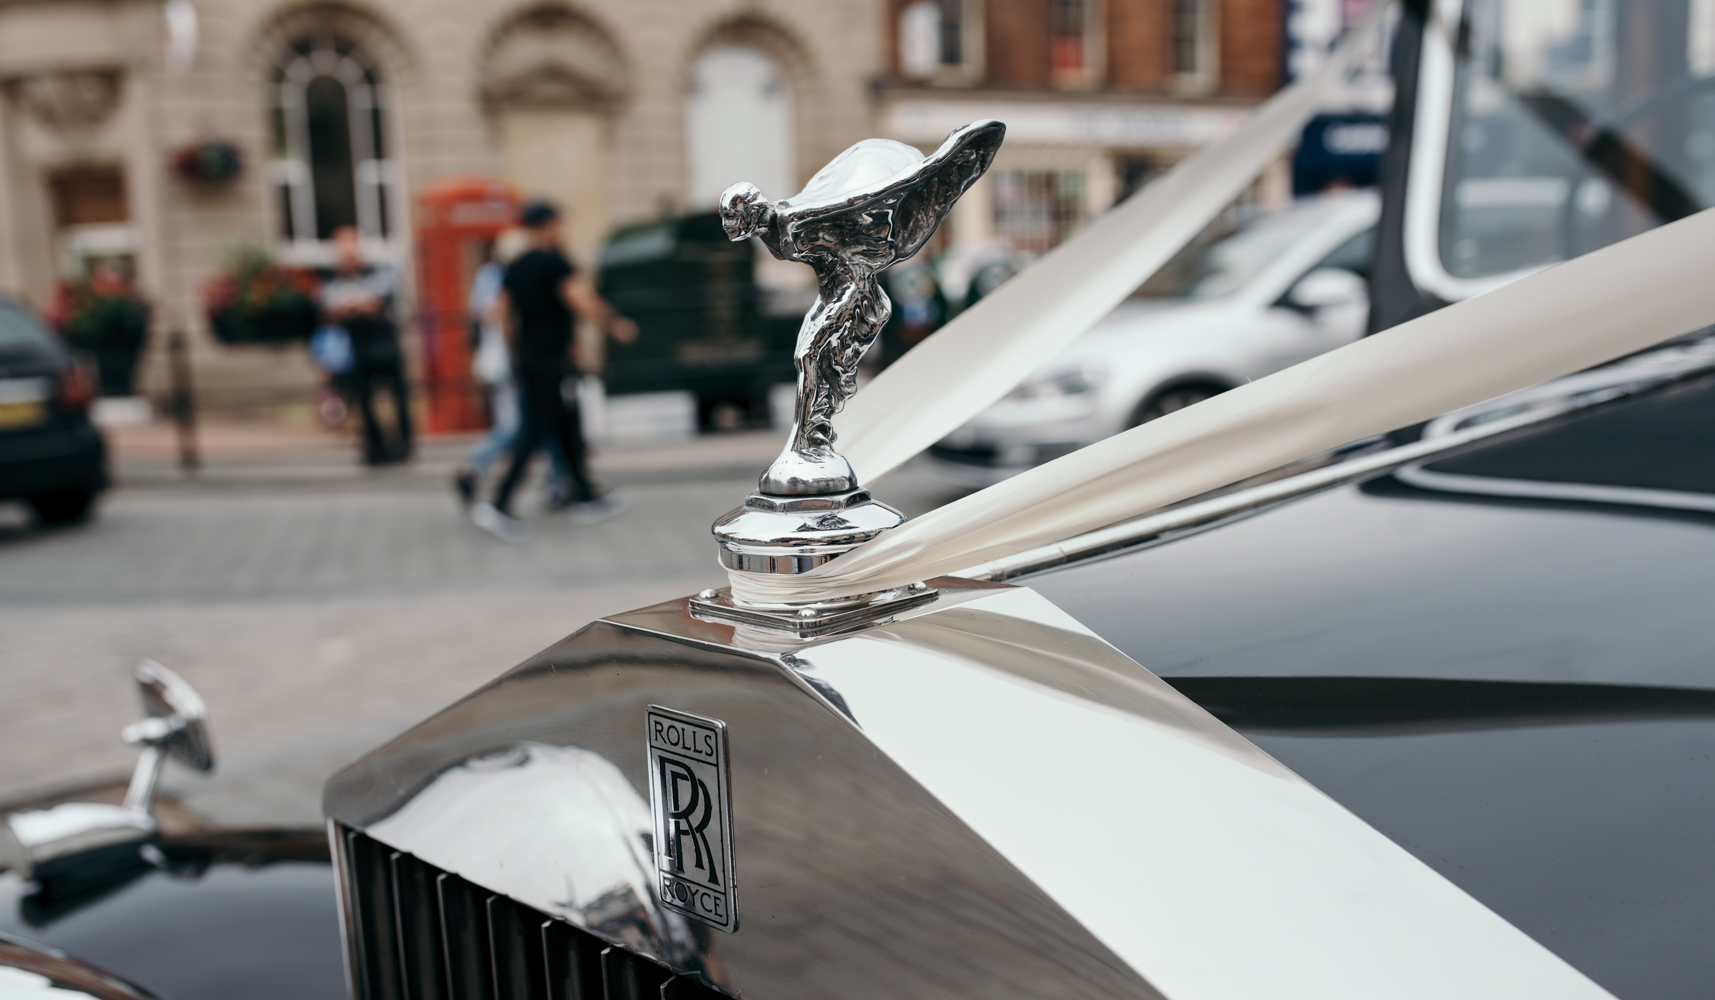 The silver lady on the front of the Rolls Royce as it arrives at the church